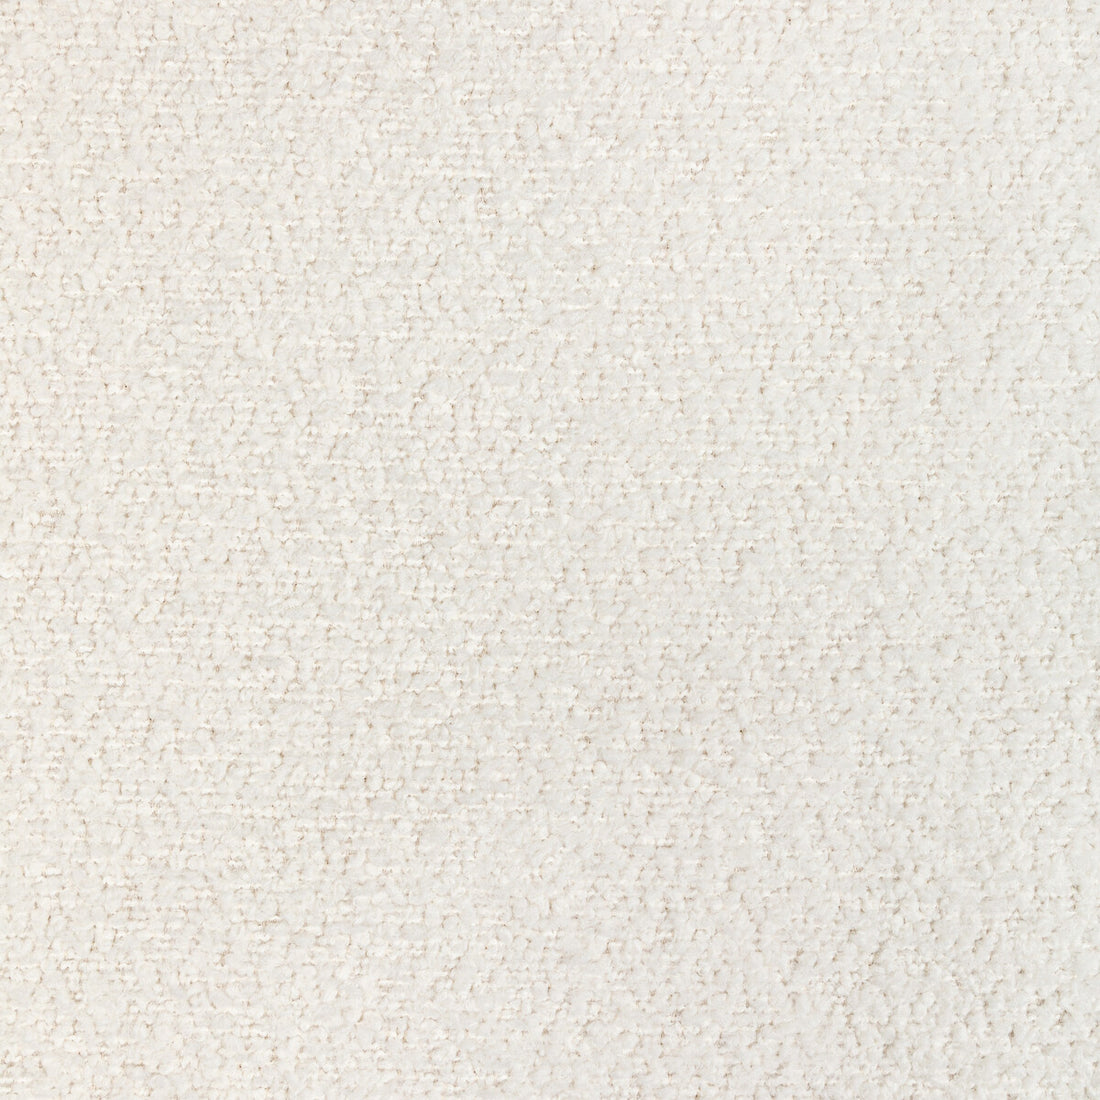 Namaste Boucle fabric in pure sugar color - pattern 36388.1.0 - by Kravet Design in the Crypton Home - Celliant collection